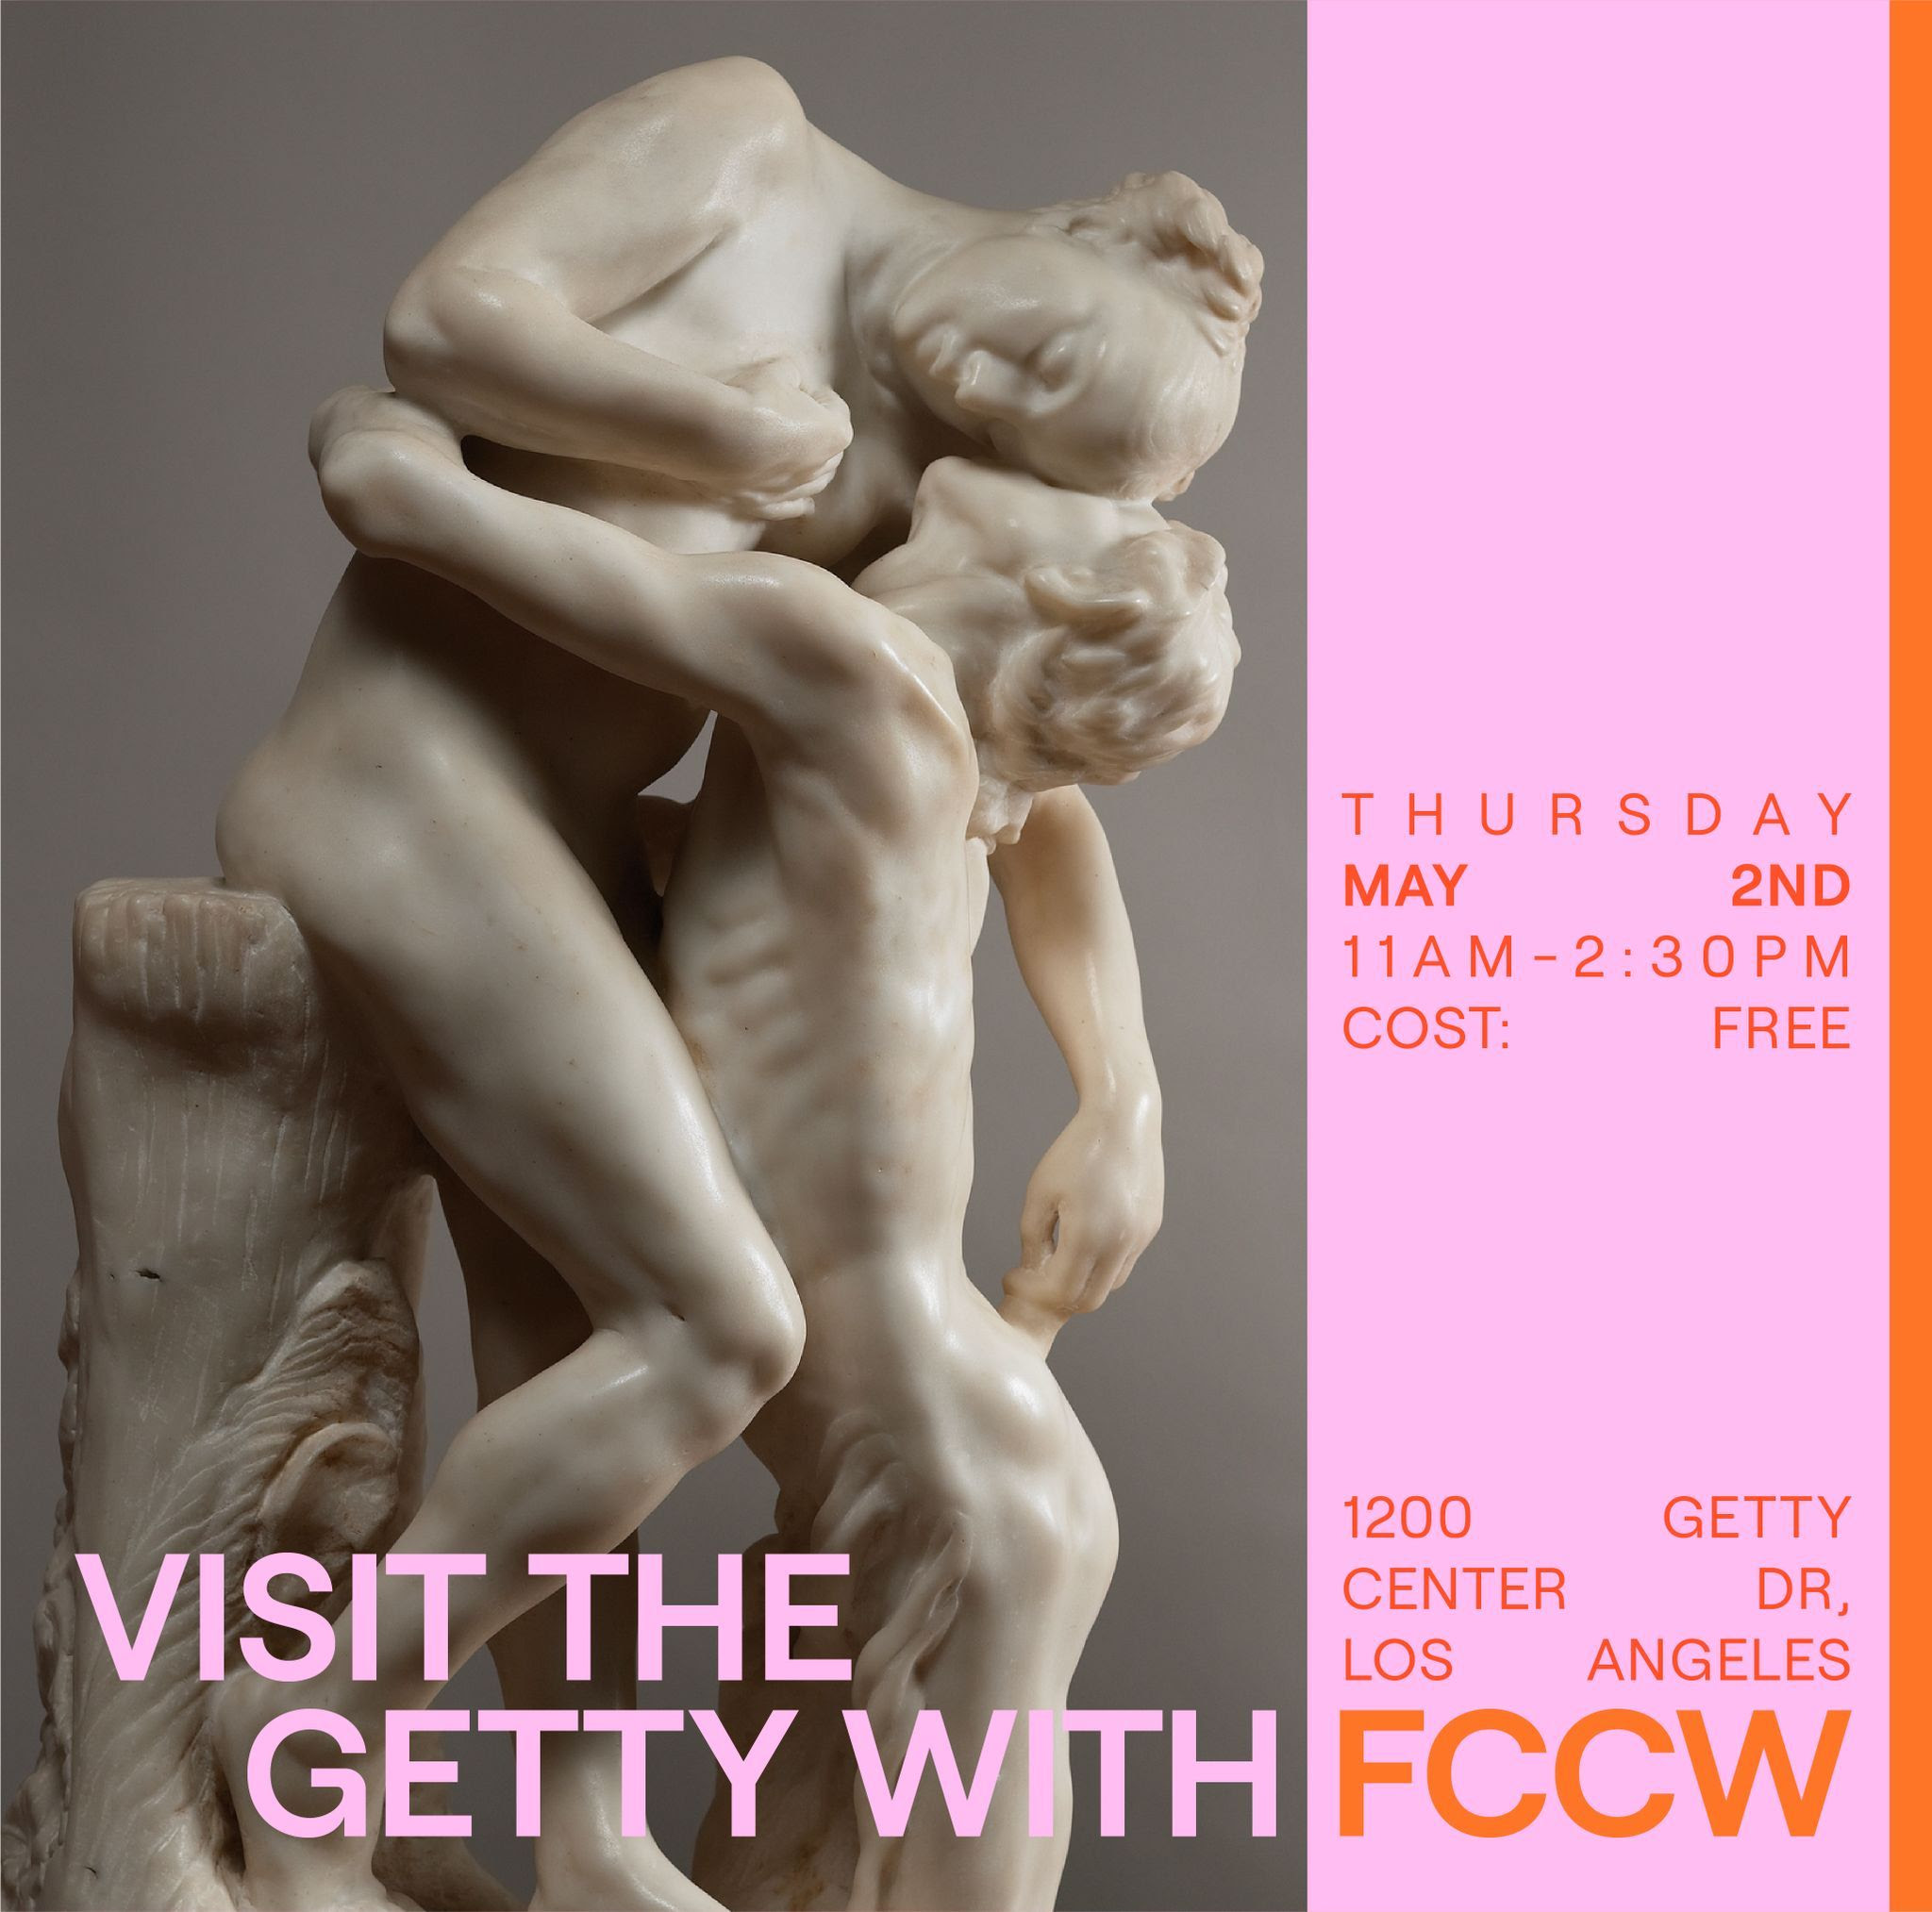 Visit the Getty with FCCW